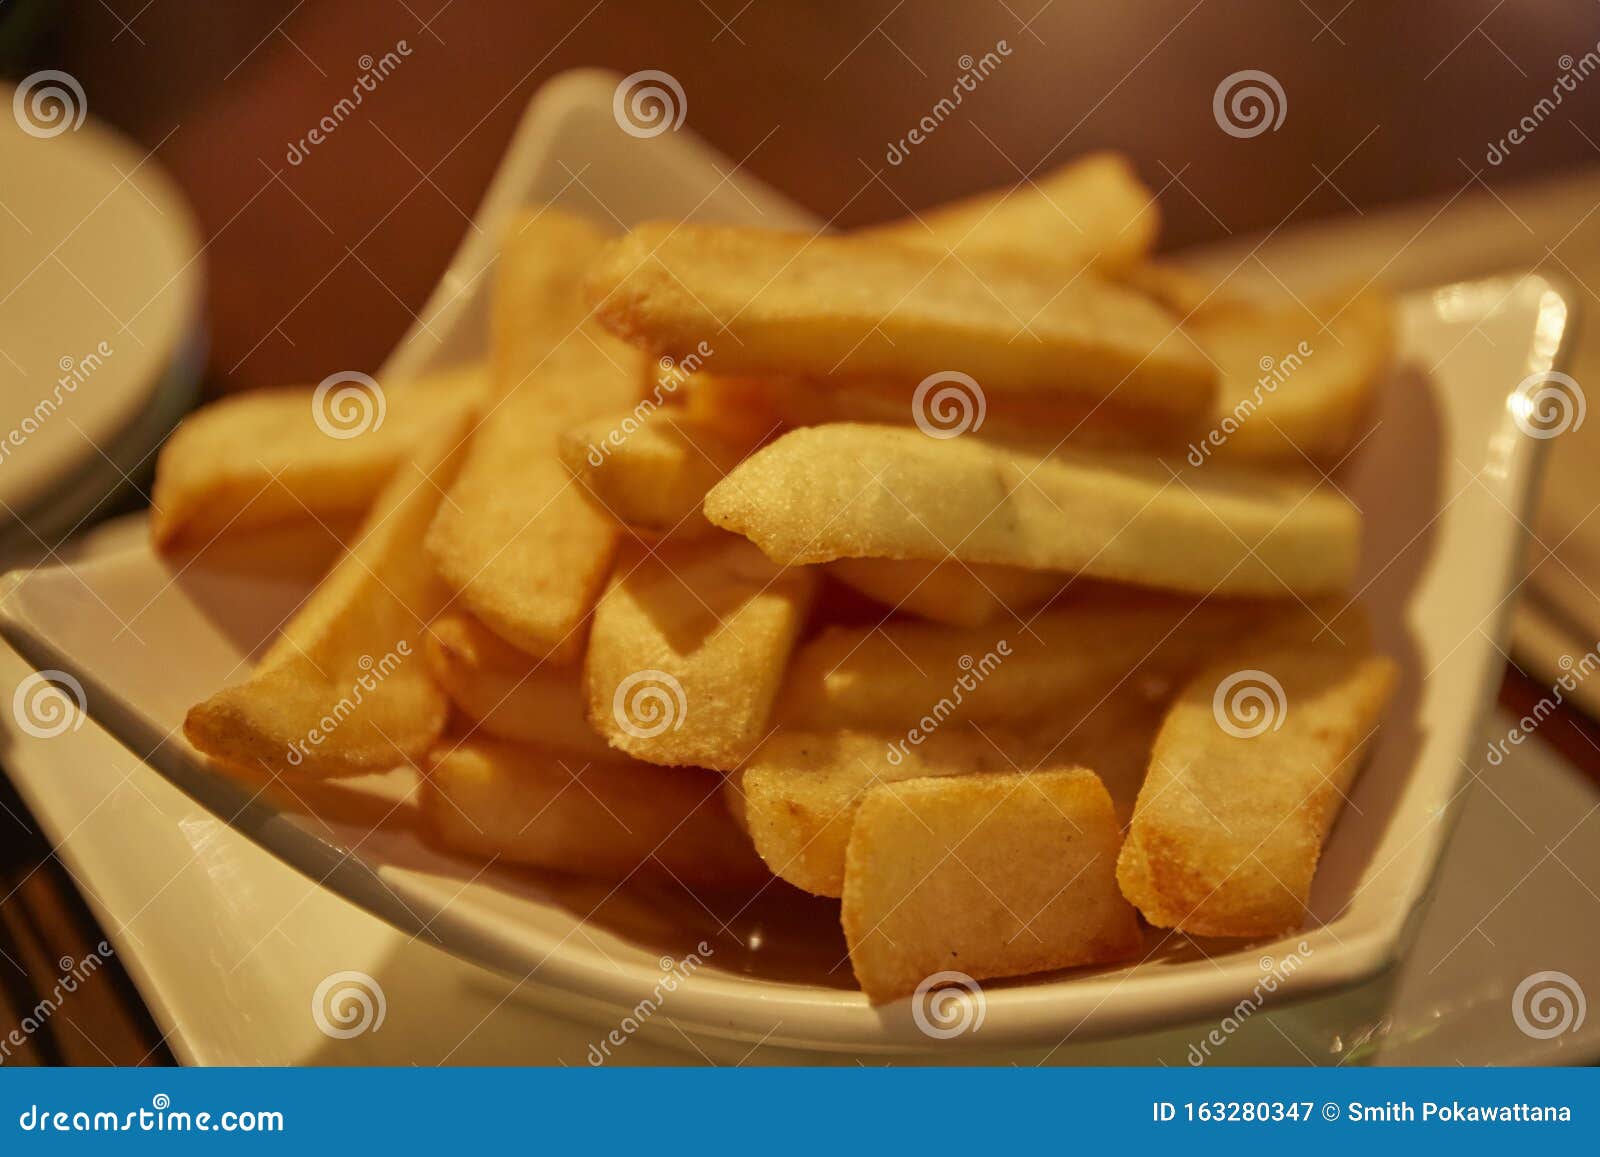 French Fries in Serving Size Stock Image - Image of nutrition, plate ...